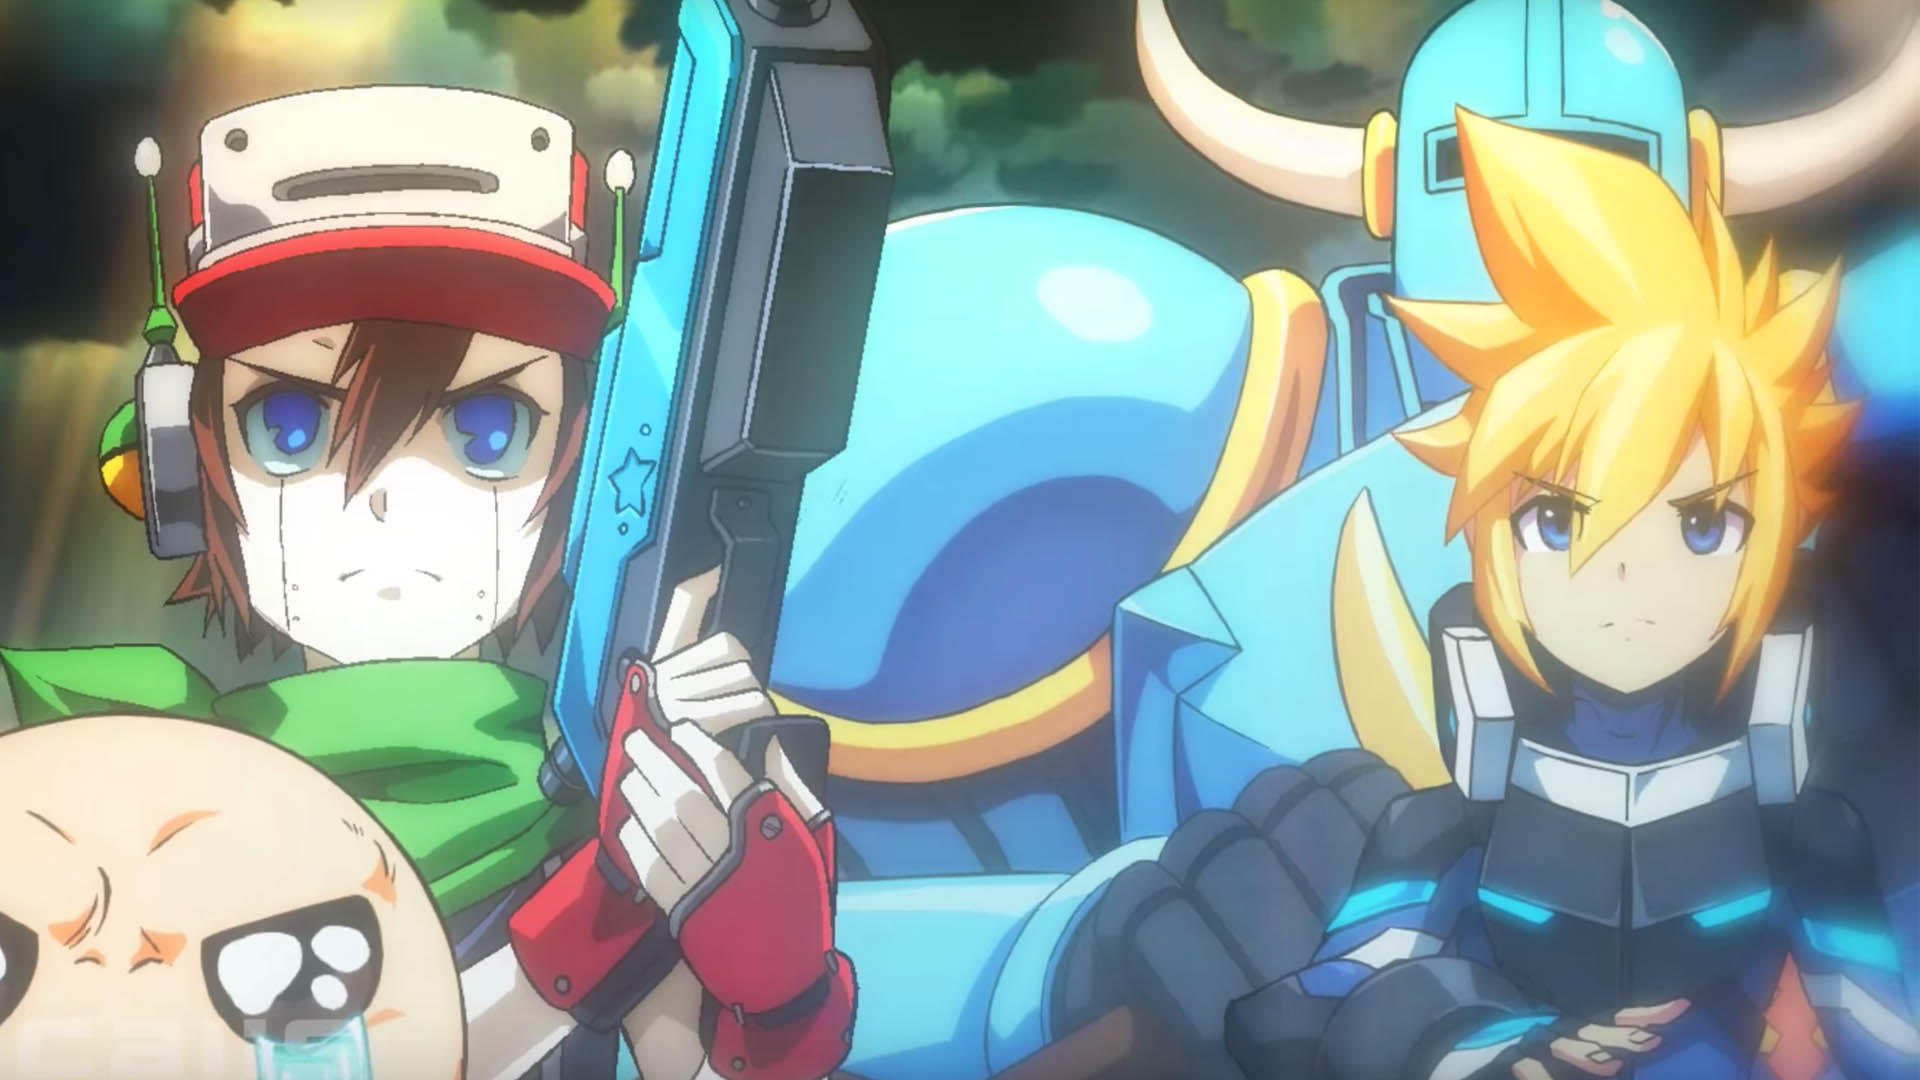 See Quote, Gunvolt, Isaac, and Shovel Knight in Blade Strangers' extended intro ...